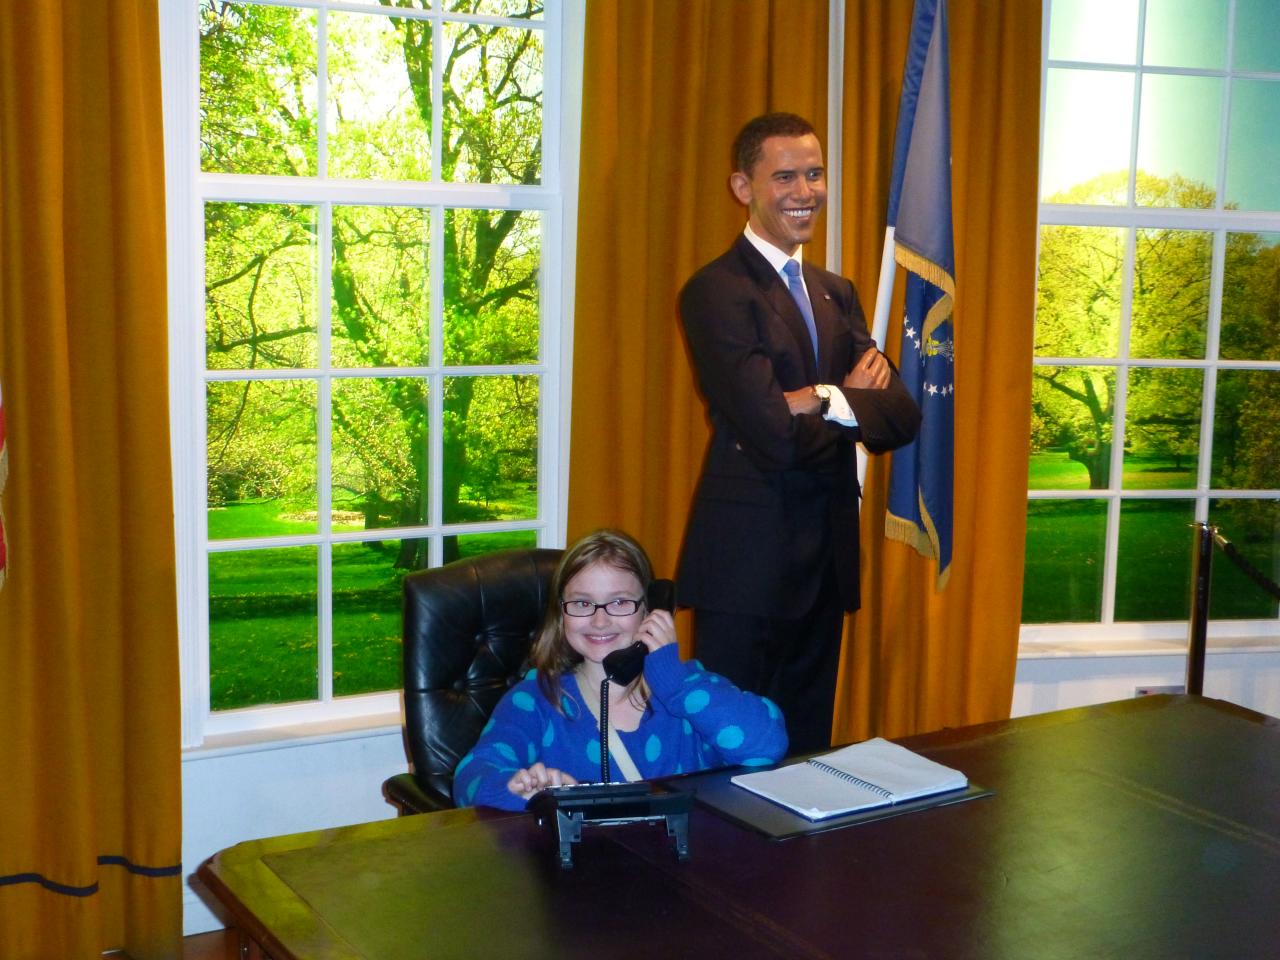 obama smiling with two young children in a large office